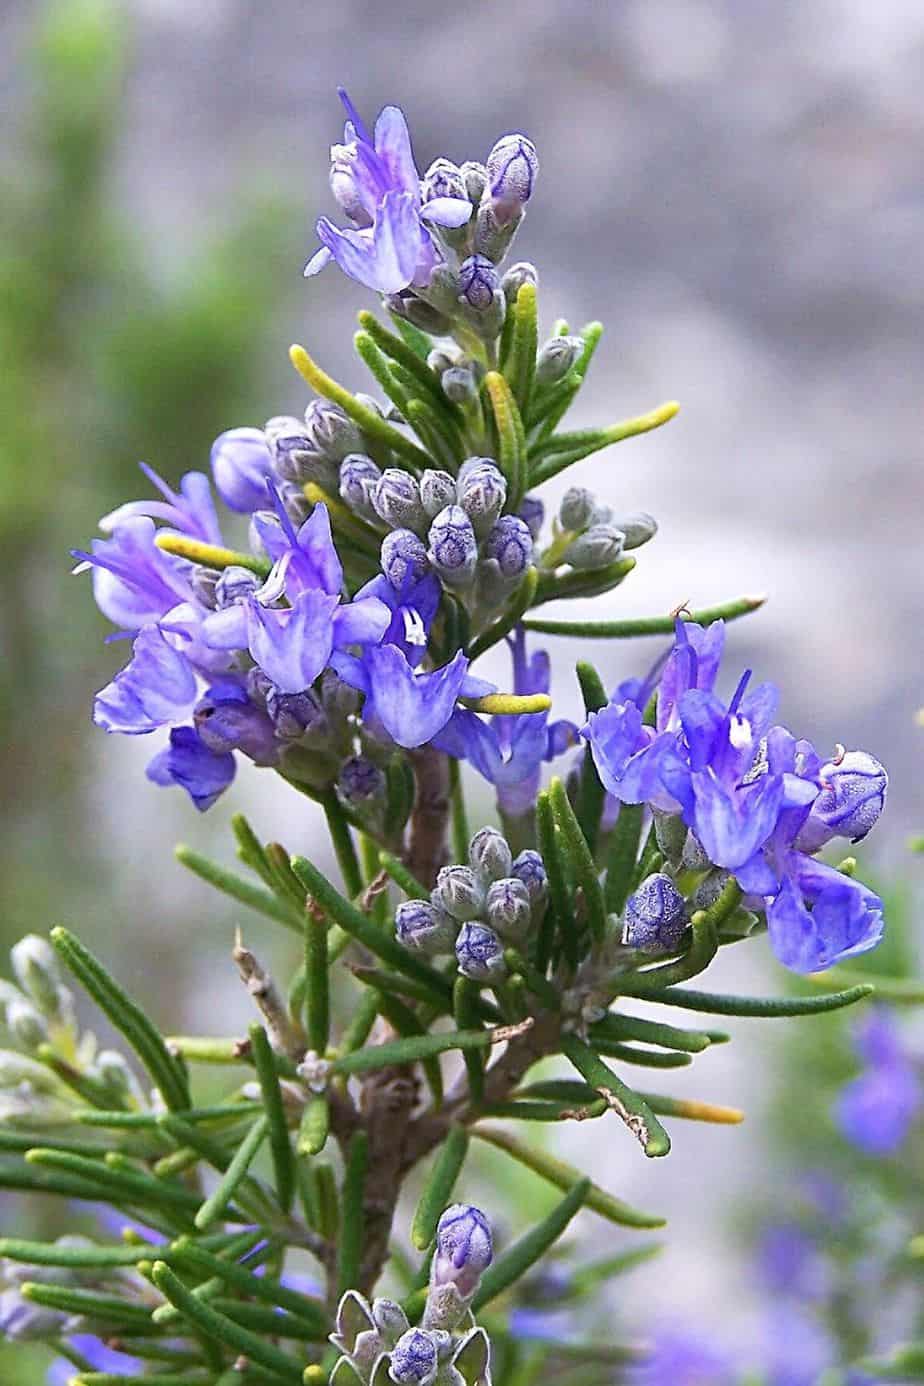 Rosemary is another aromatic herb you can grow in your southwest facing garden